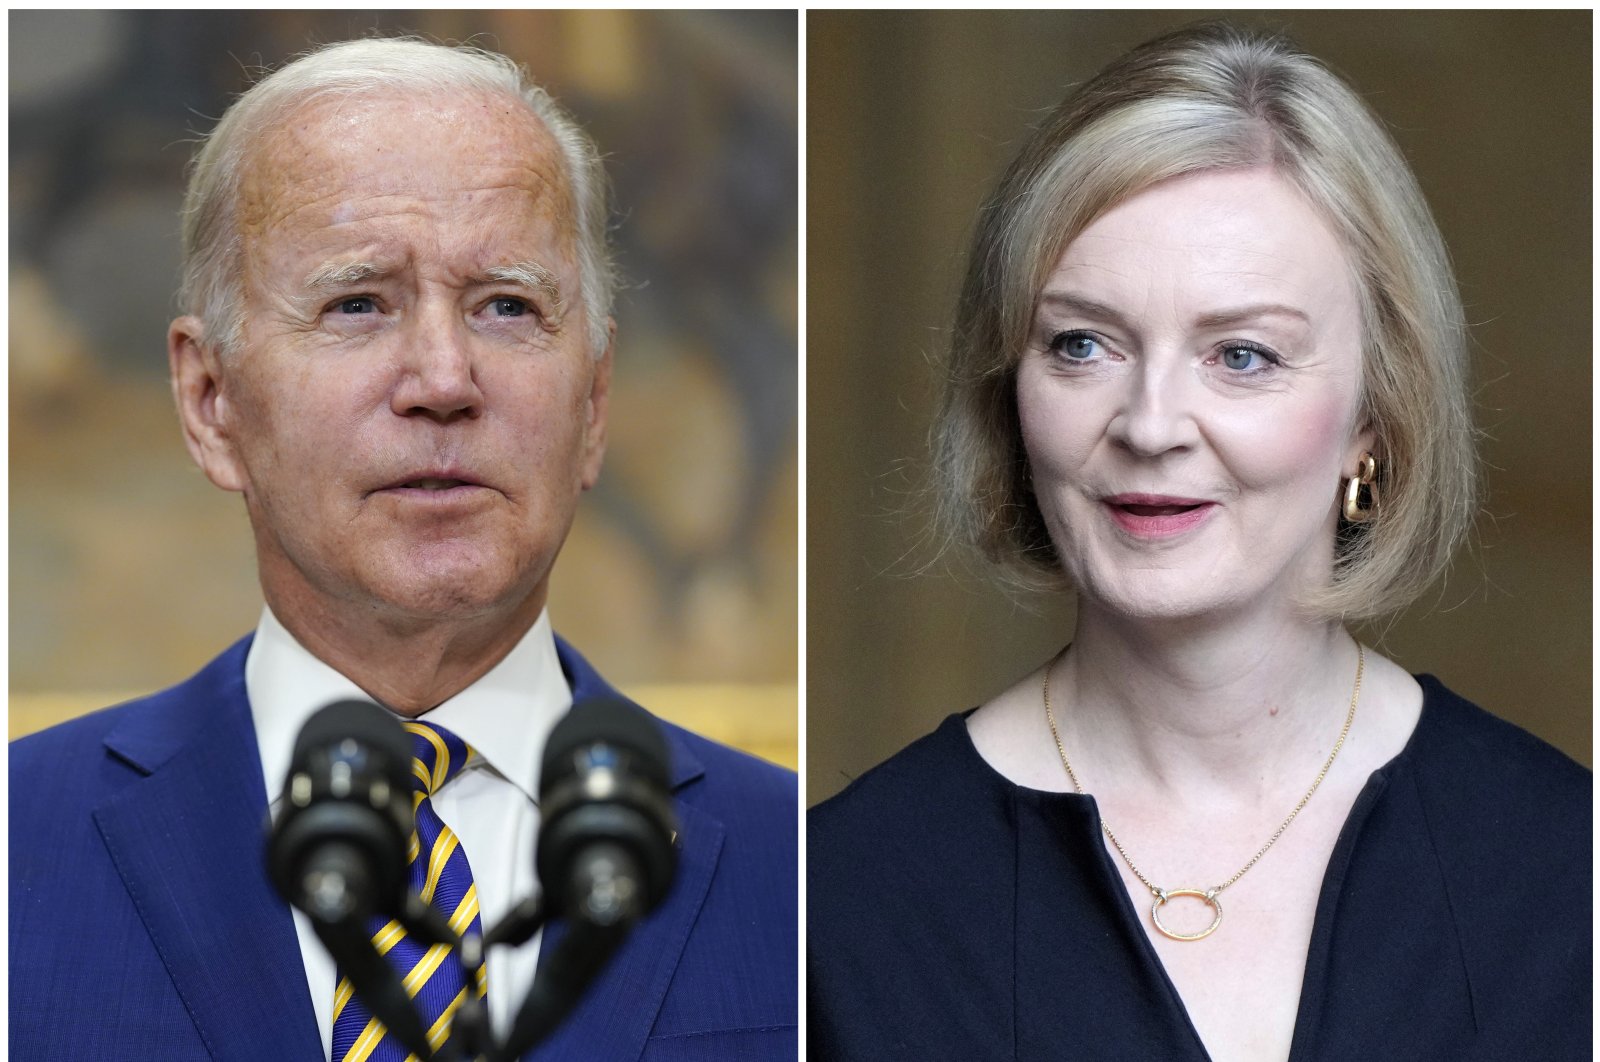 This combination of photos shows U.S. President Joe Biden (L) at the White House in Washington, Aug. 24, 2022, and Britain’s Prime Minister Liz Truss at Westminster Hall, in the Palace of Westminster, in London, U.K., Sept. 12, 2022. (AP Photo)